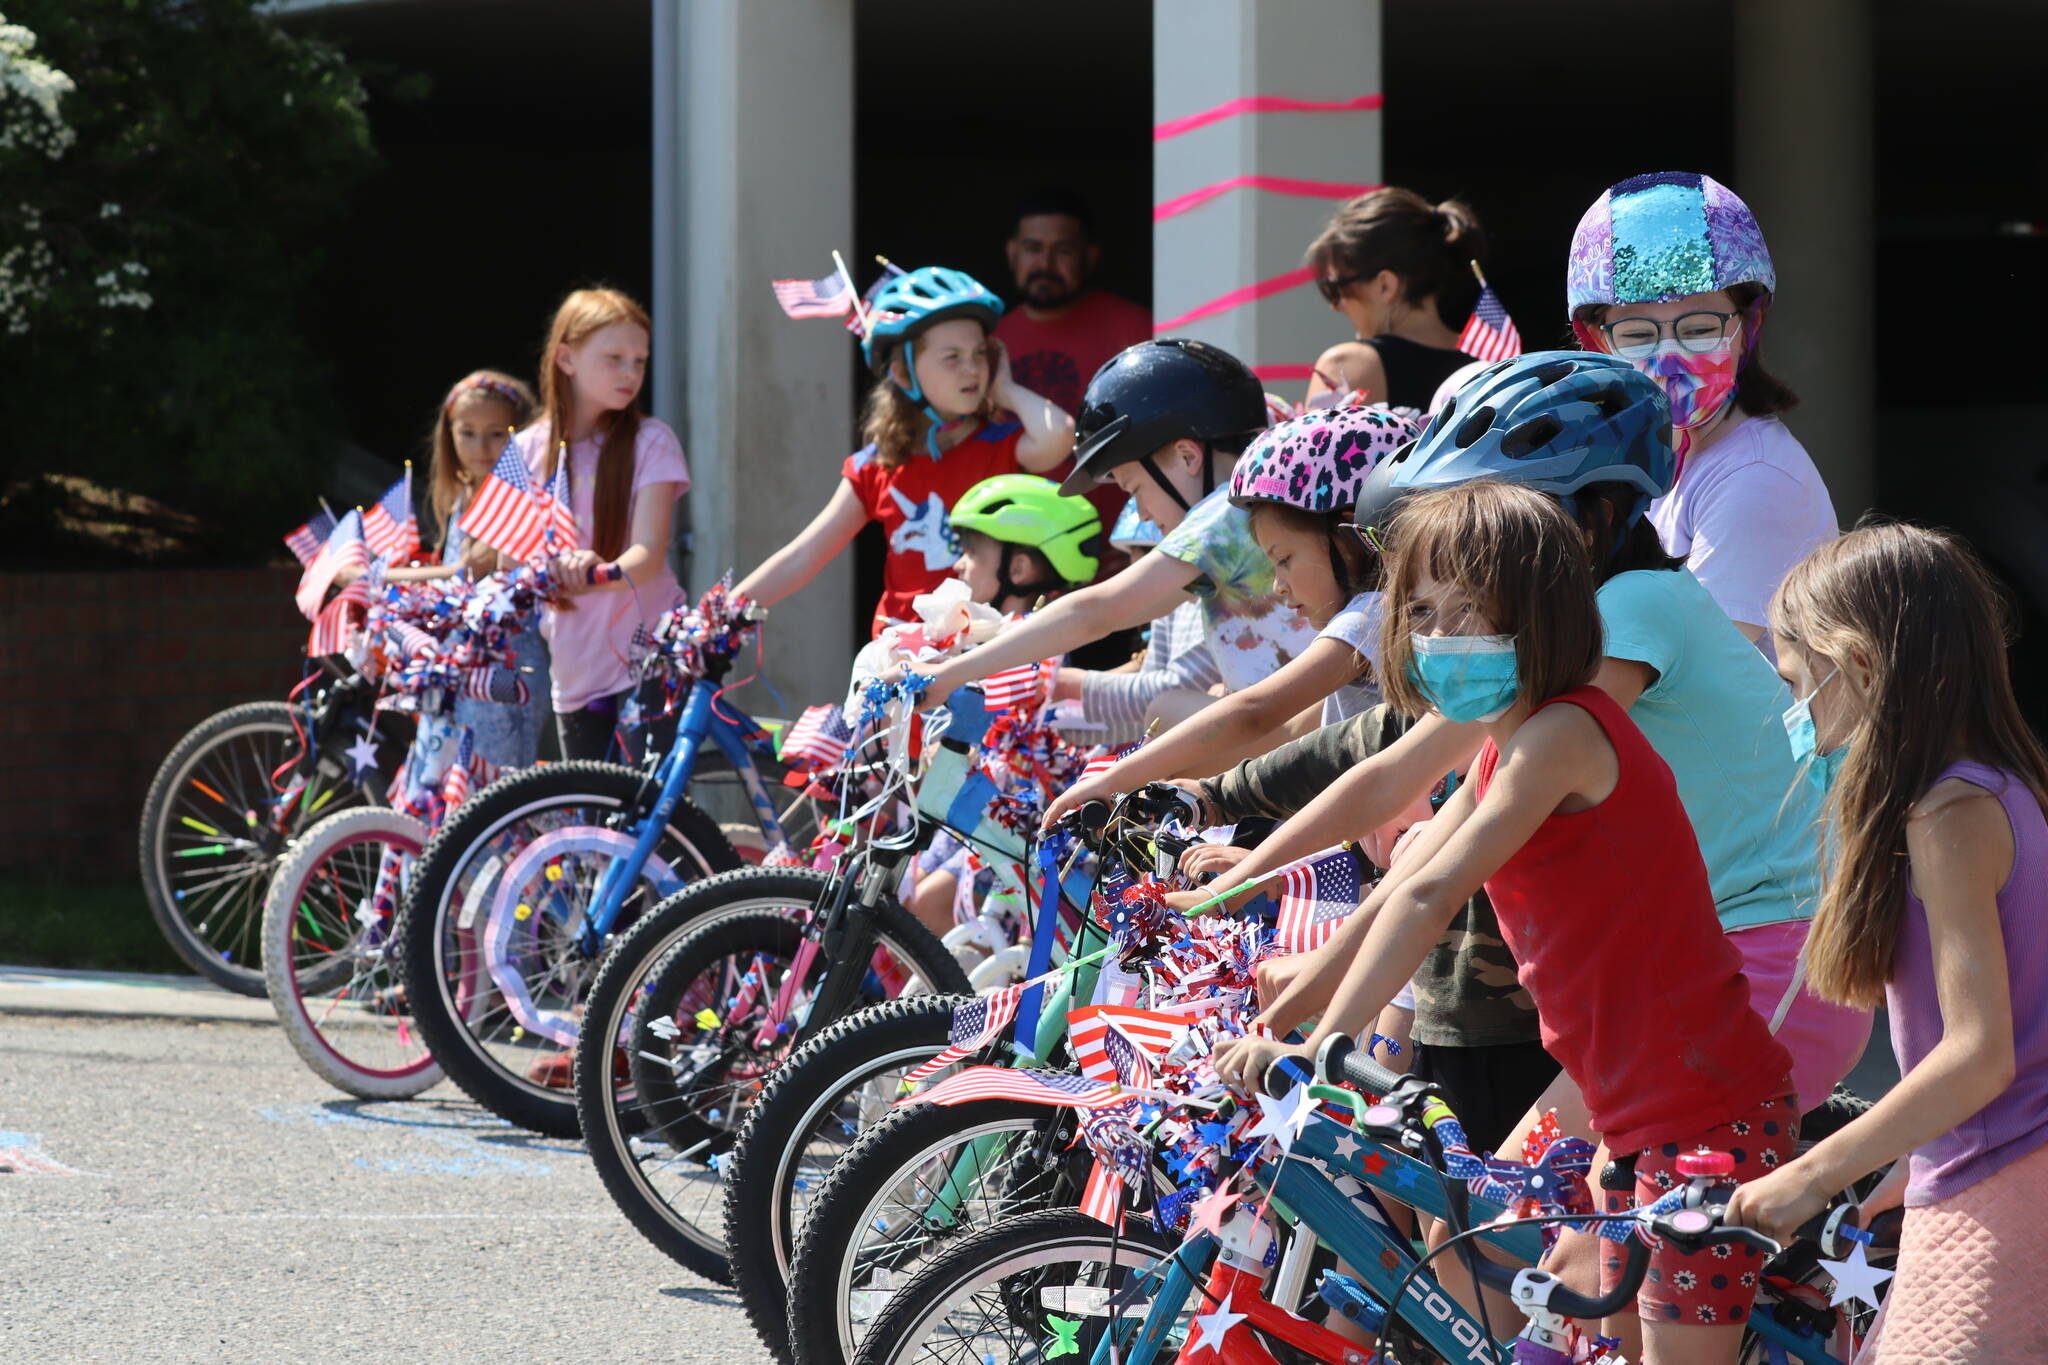 Douglas kids line up with their freshly decorated rides during the Douglas Fourth of July Committee’s annual Bicycle Decorating session held at the Douglas Public Library on July 2, 2022. (Michael S. Lockett / Juneau Empire)